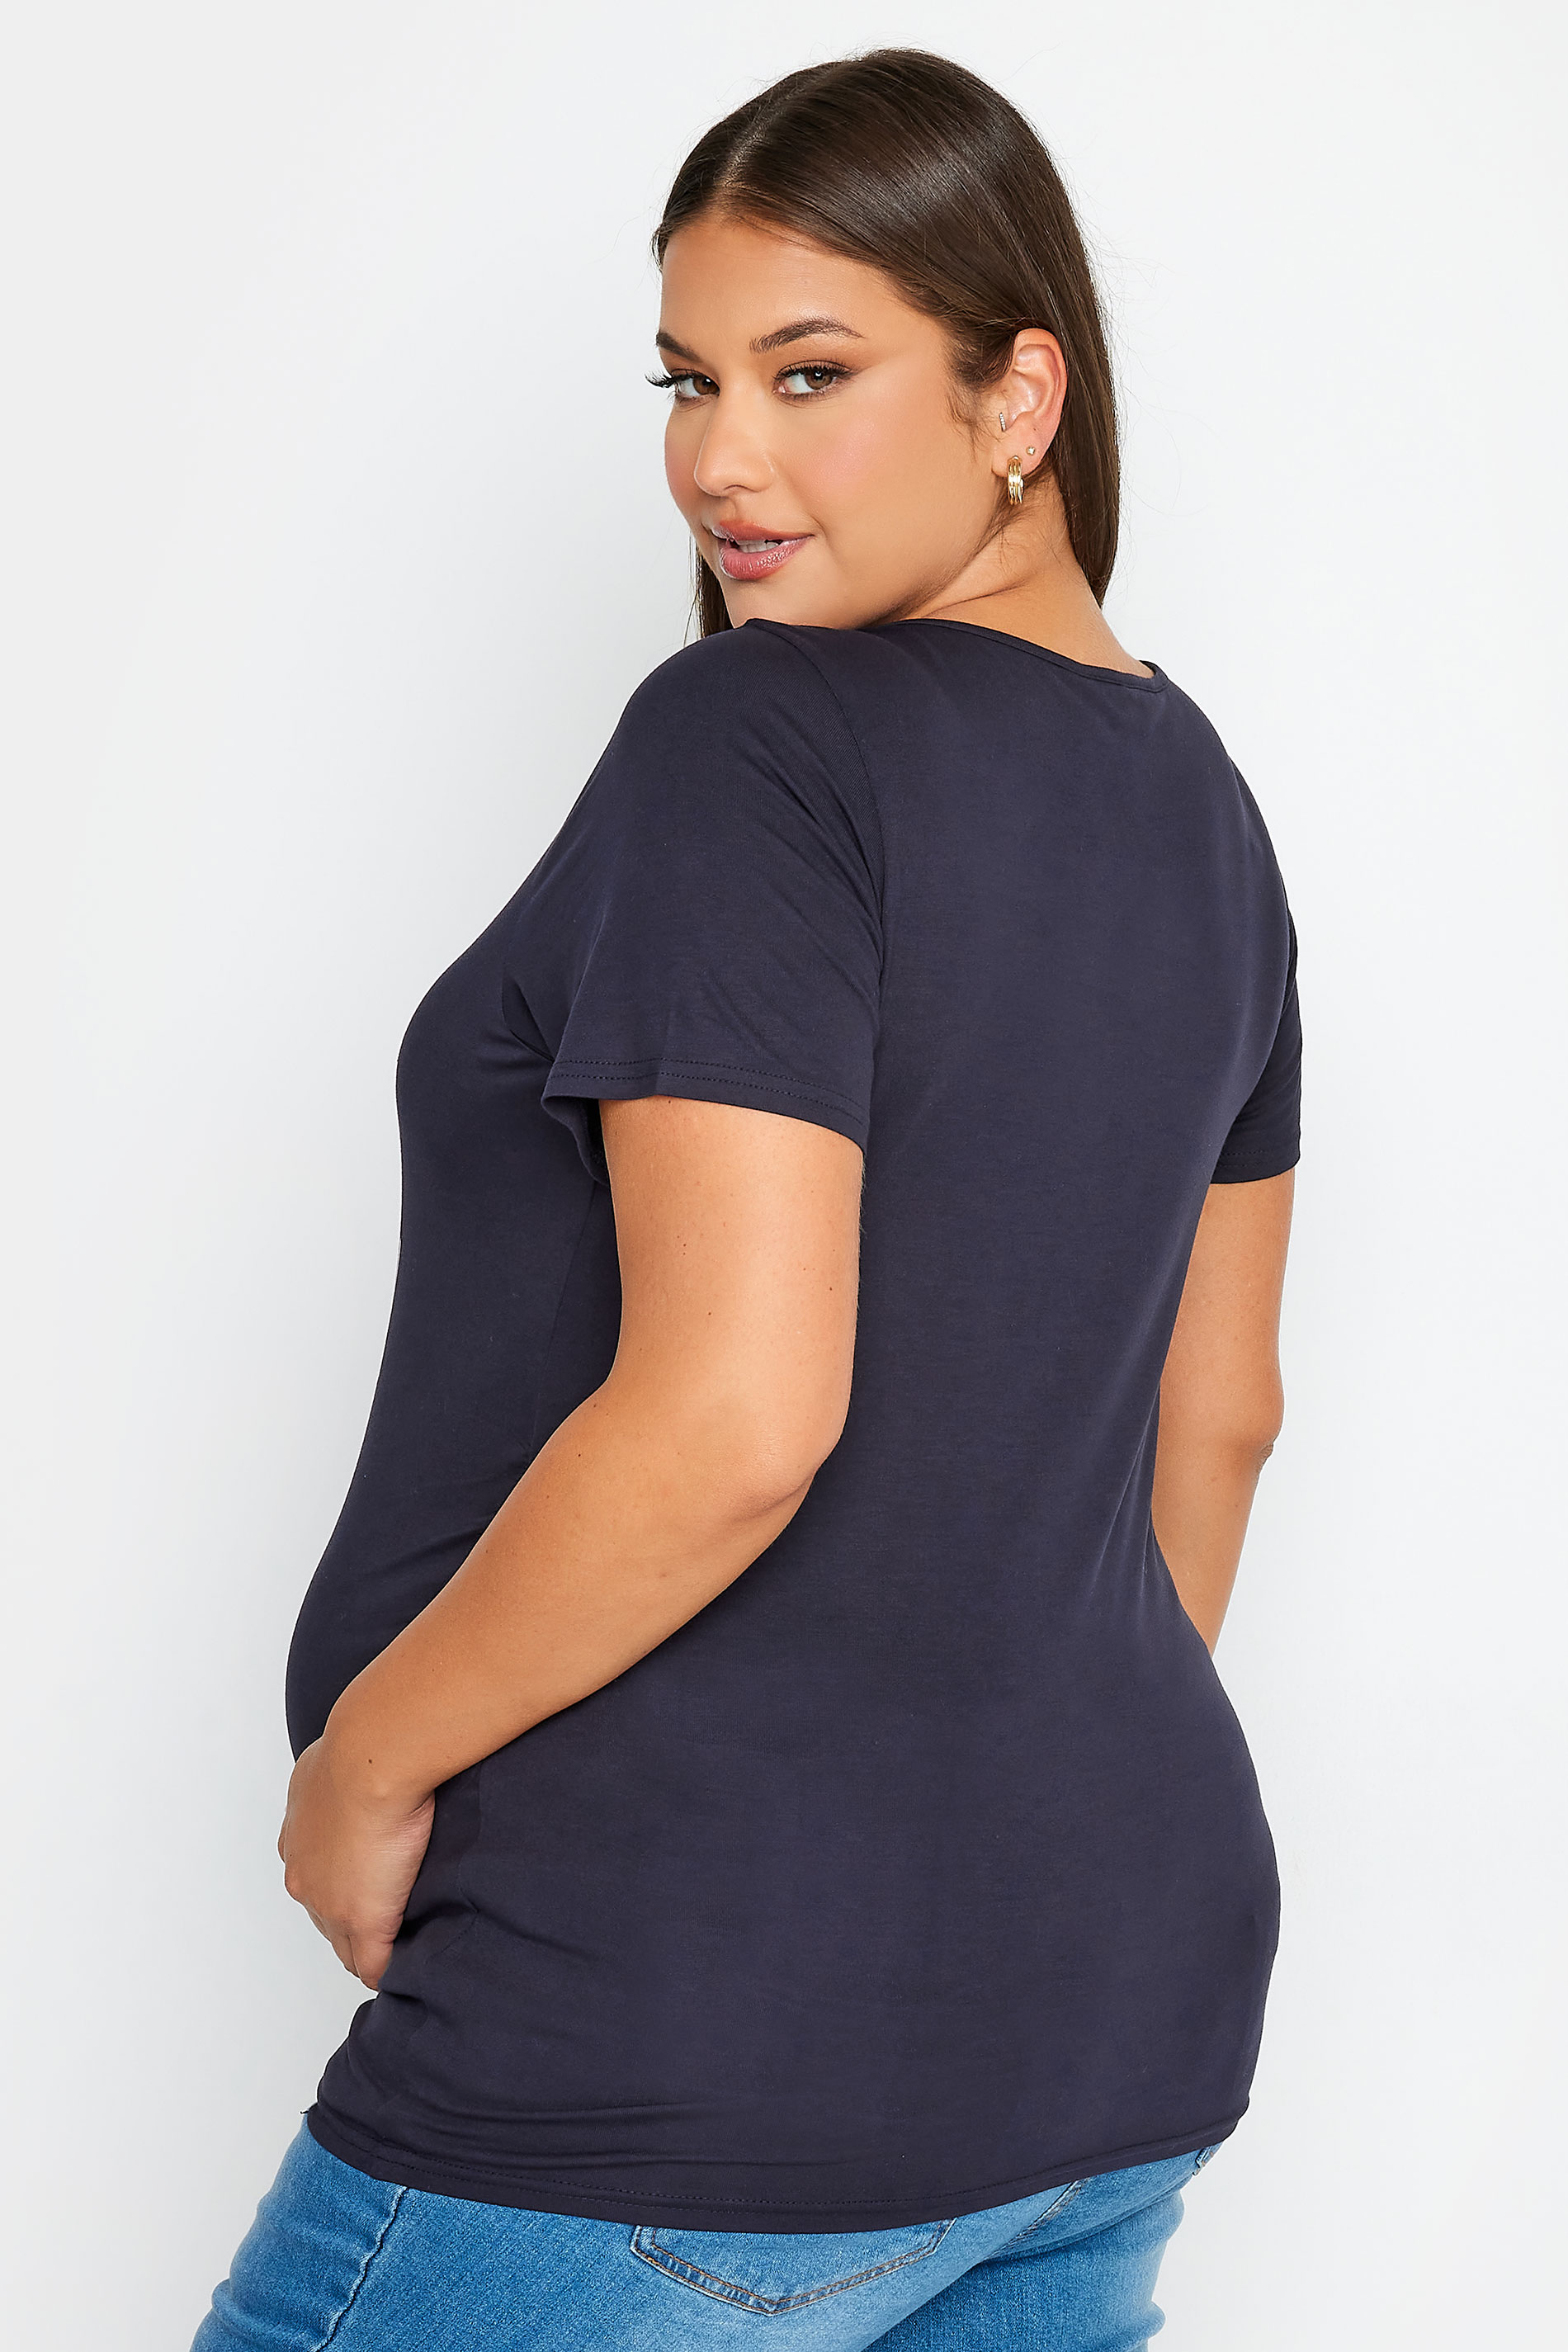 BUMP IT UP MATERNITY Plus Size Navy Blue 'Baby On Board' Slogan T-shirt | Yours Clothing 3